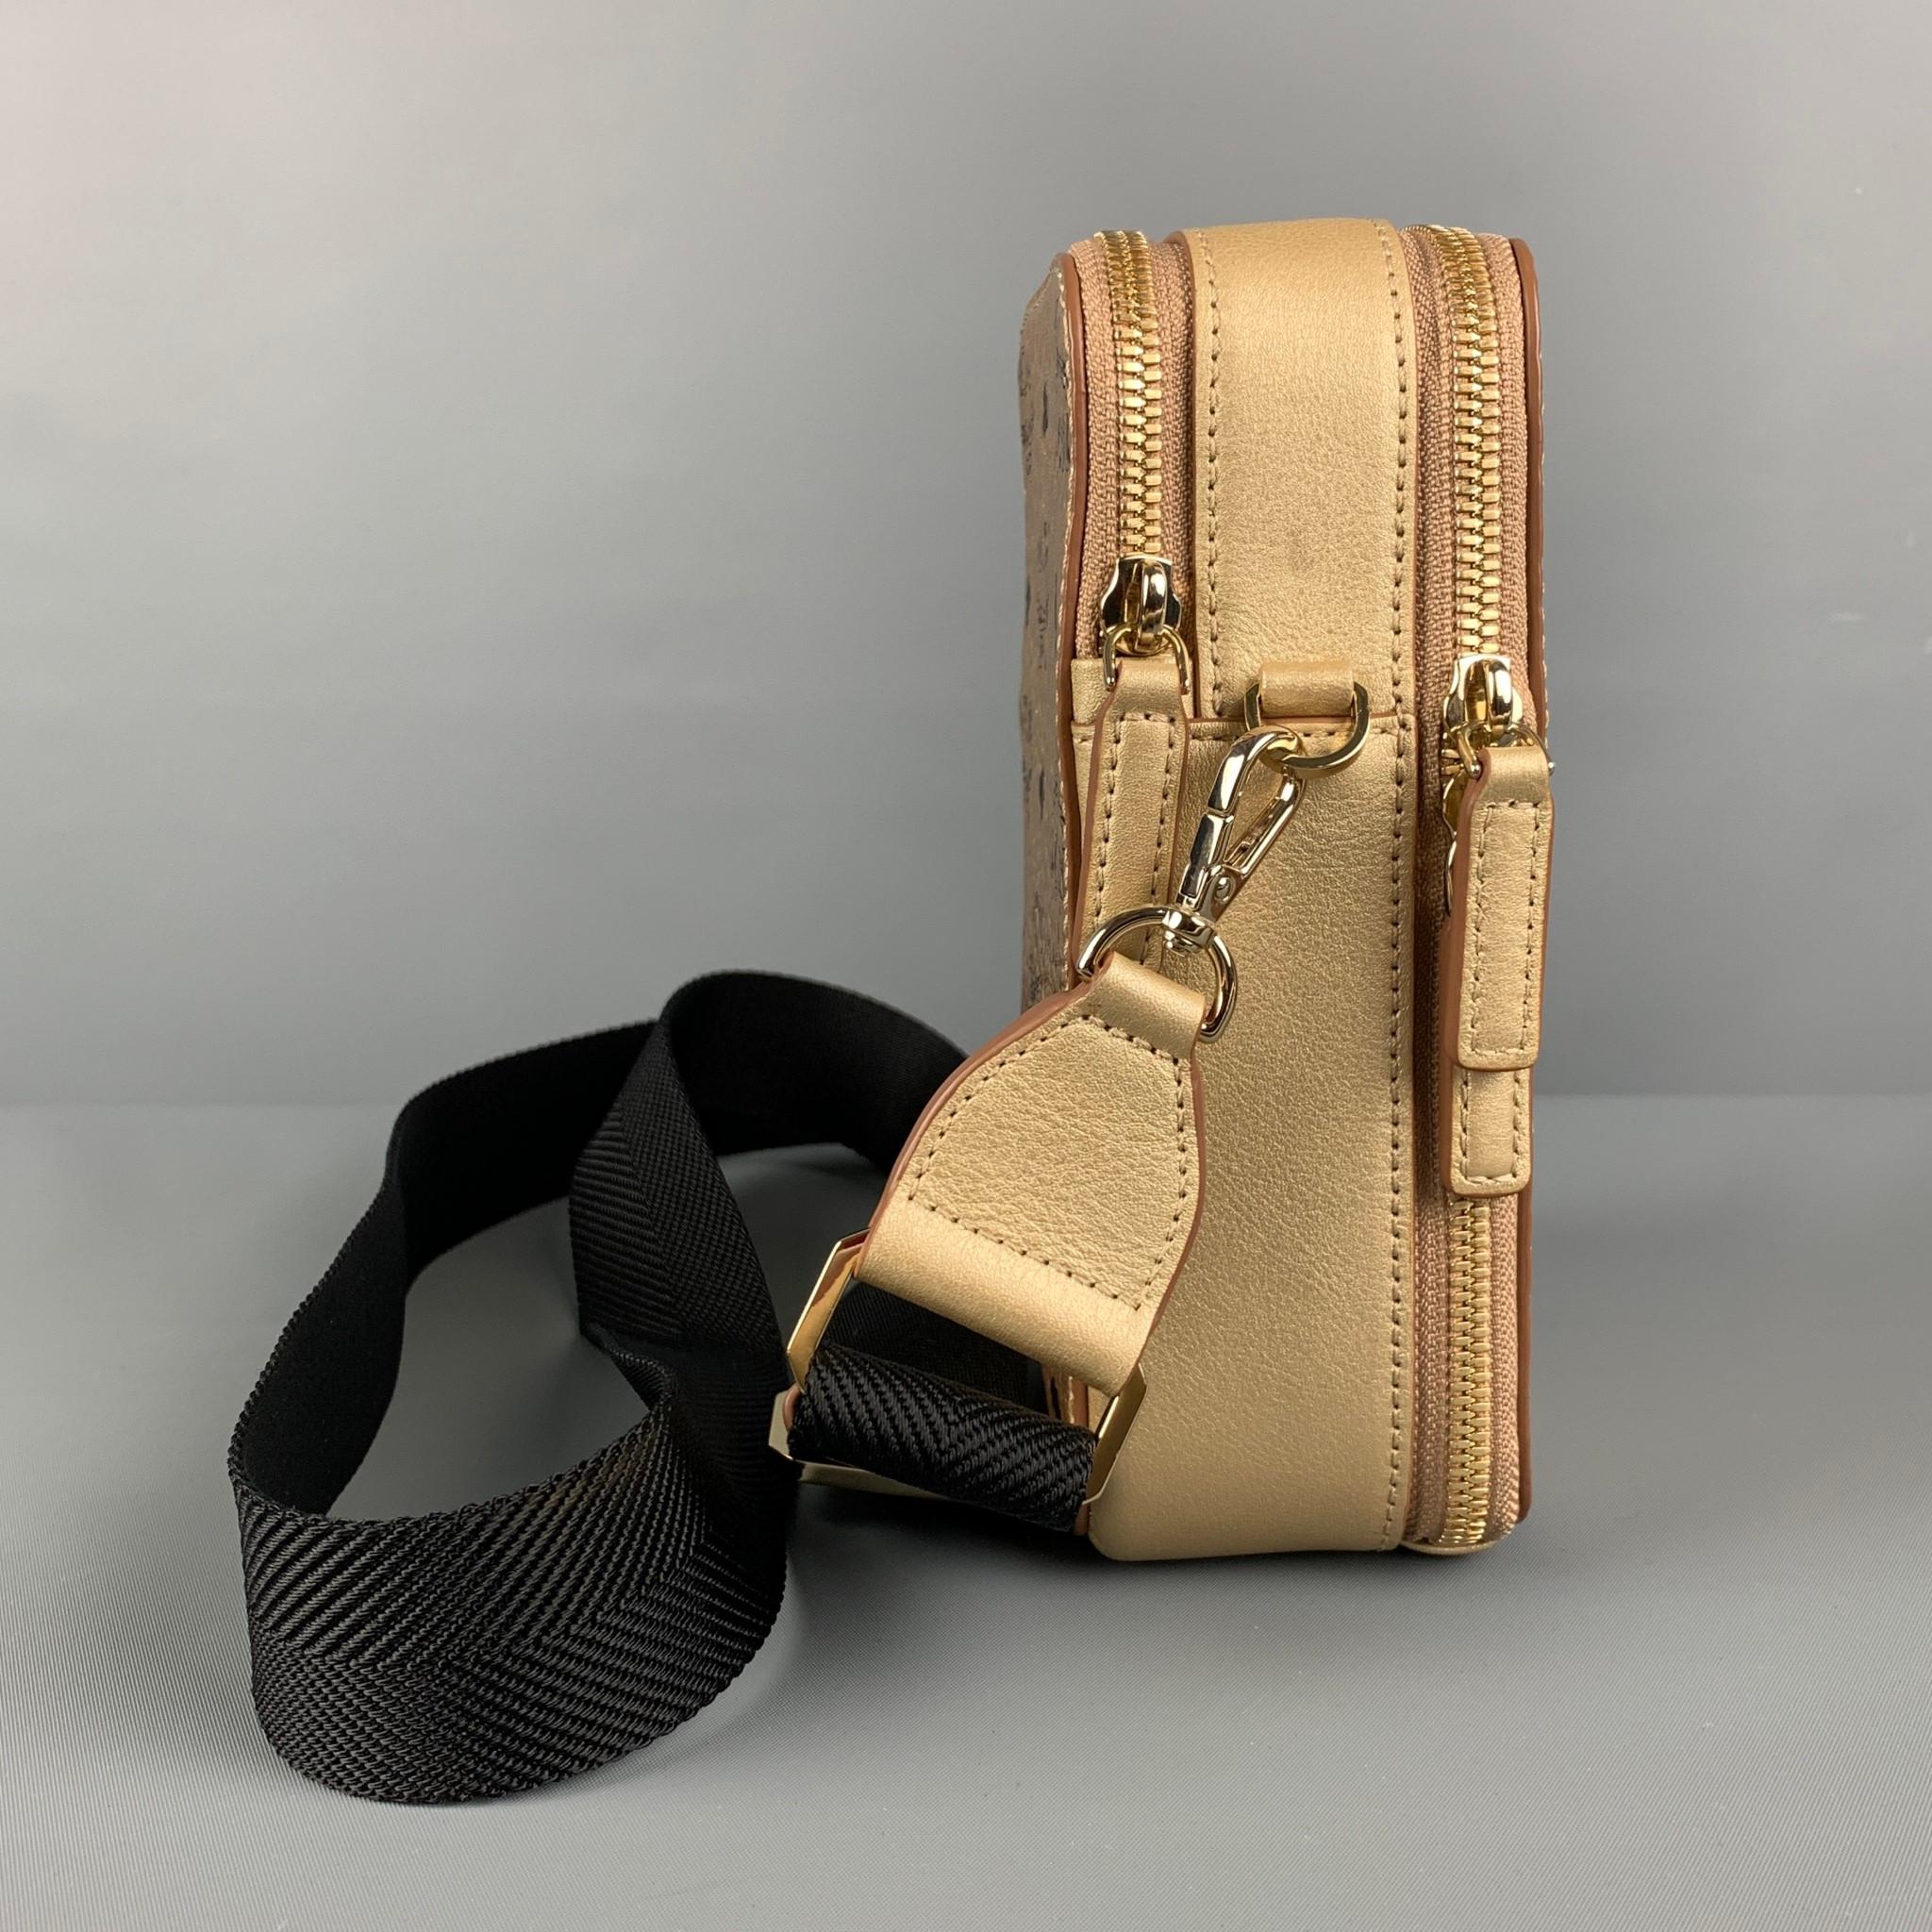 MCM camera bag comes in a gold & black monogram coated canvas featuring a detachable crossbody strap, inner slots, and a zipper closure. Comes with dust bag.

Excellent Pre-Owned Condition.
Marked: 1616R

Measurements:

Length: 4 in.
Width: 2.5